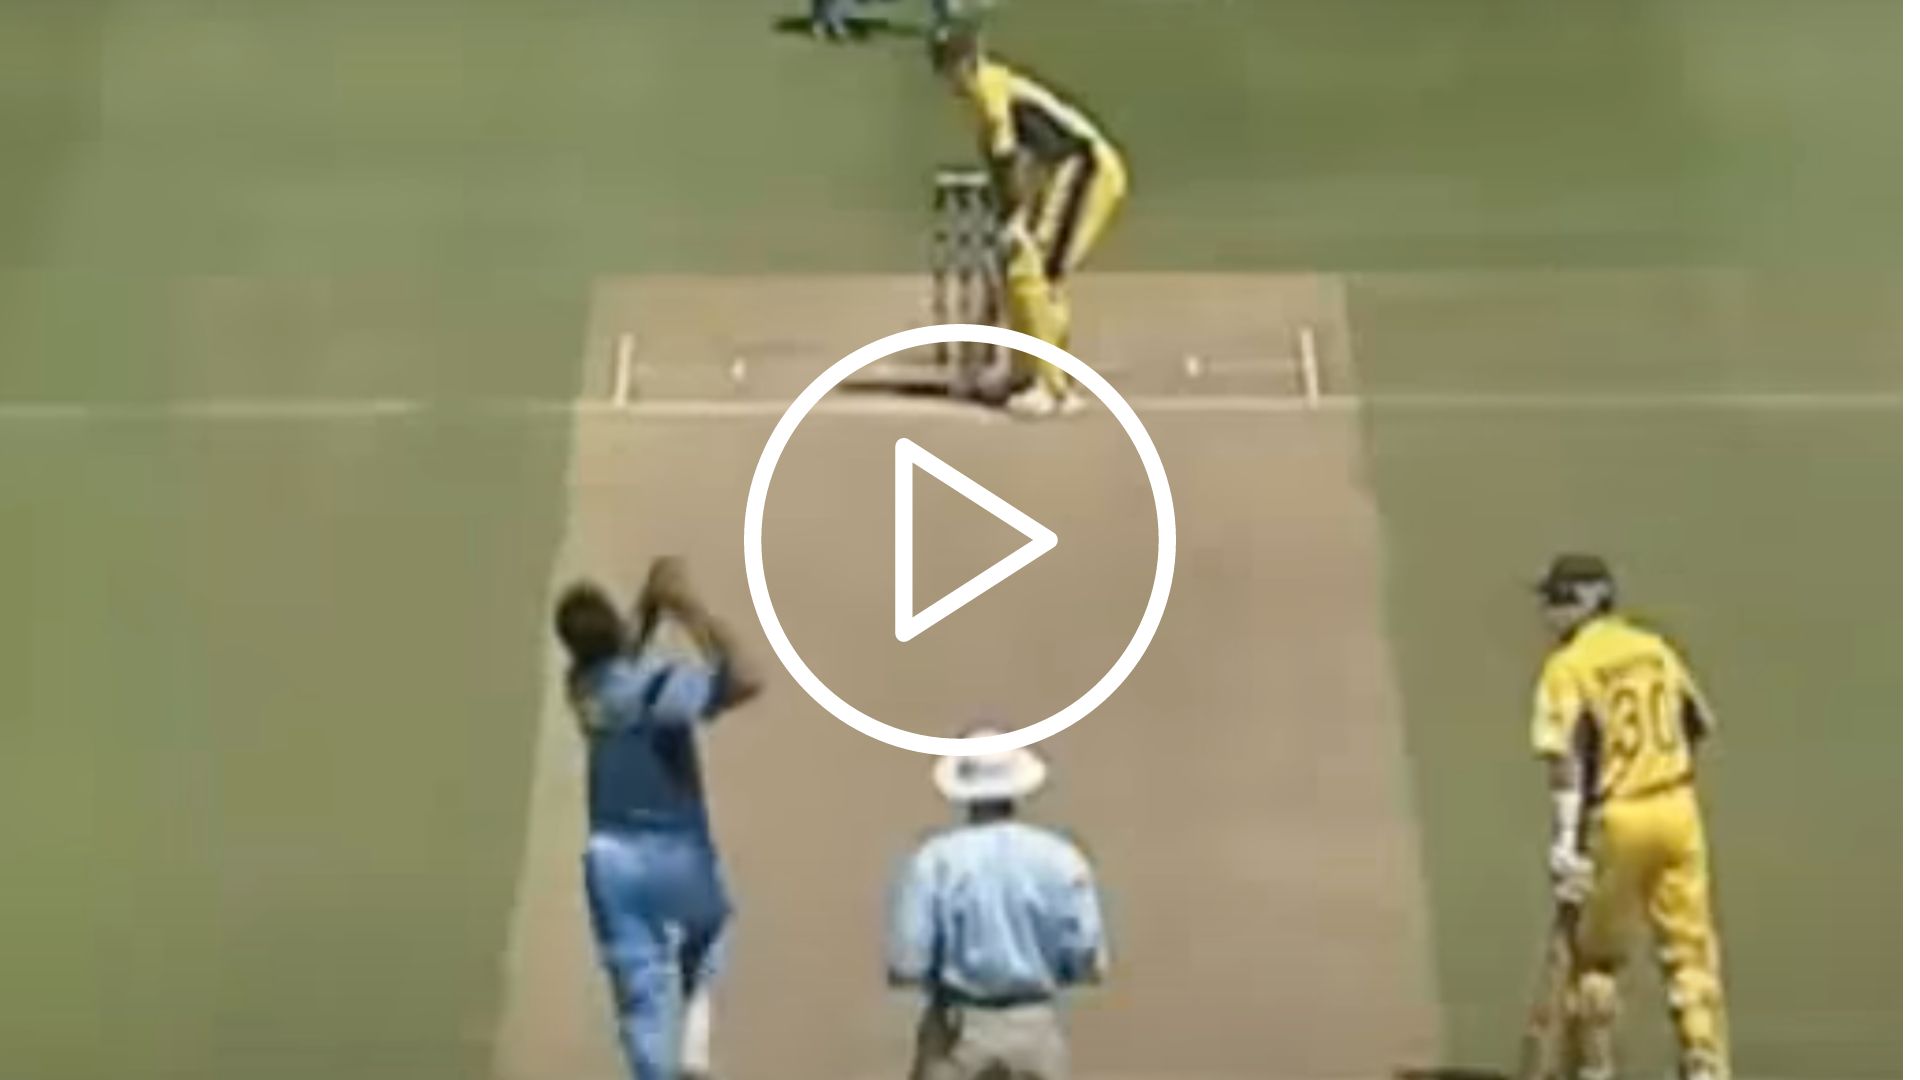 [Watch] Whеn Ricky Ponting Slammеd 140* Against India In World Cup 2003 Final